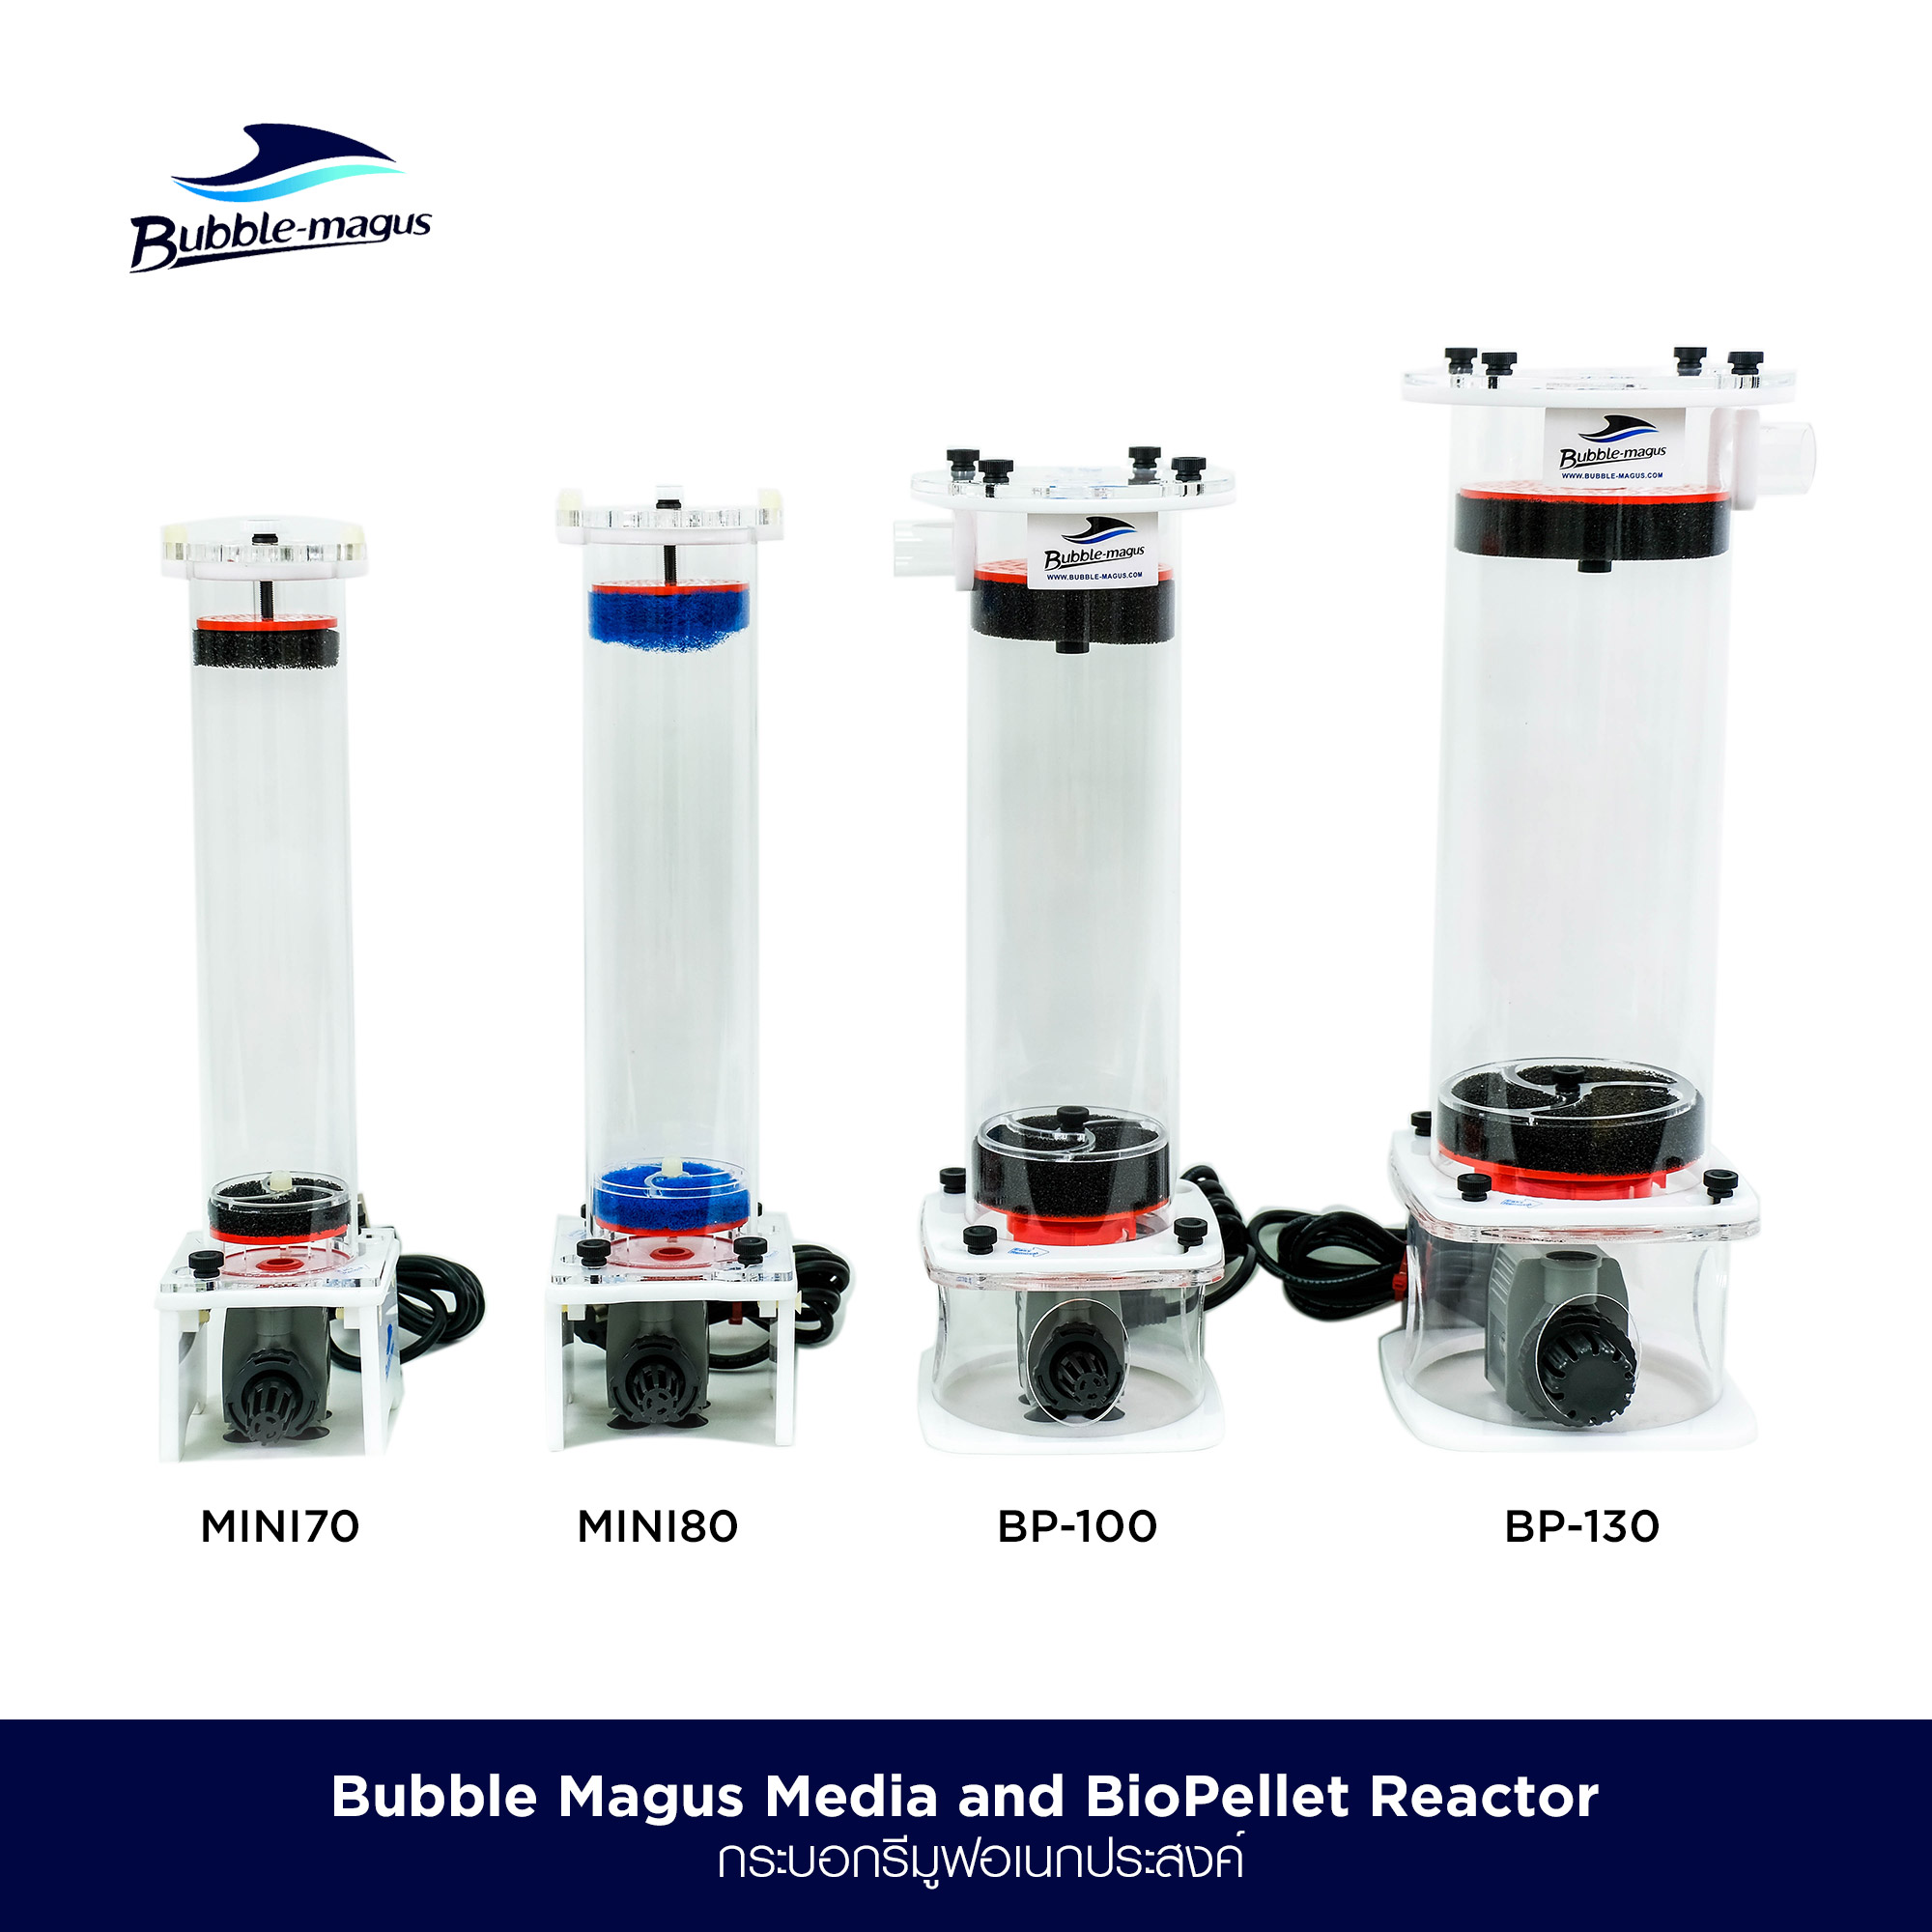 Bubble Magus BioPellet and Media Reactor,  internal multi-purpose fluidize media reactor that can be use with carbon, GFO, or Biopellets.  (MINI70, MINI80, BP-100, BP-130)